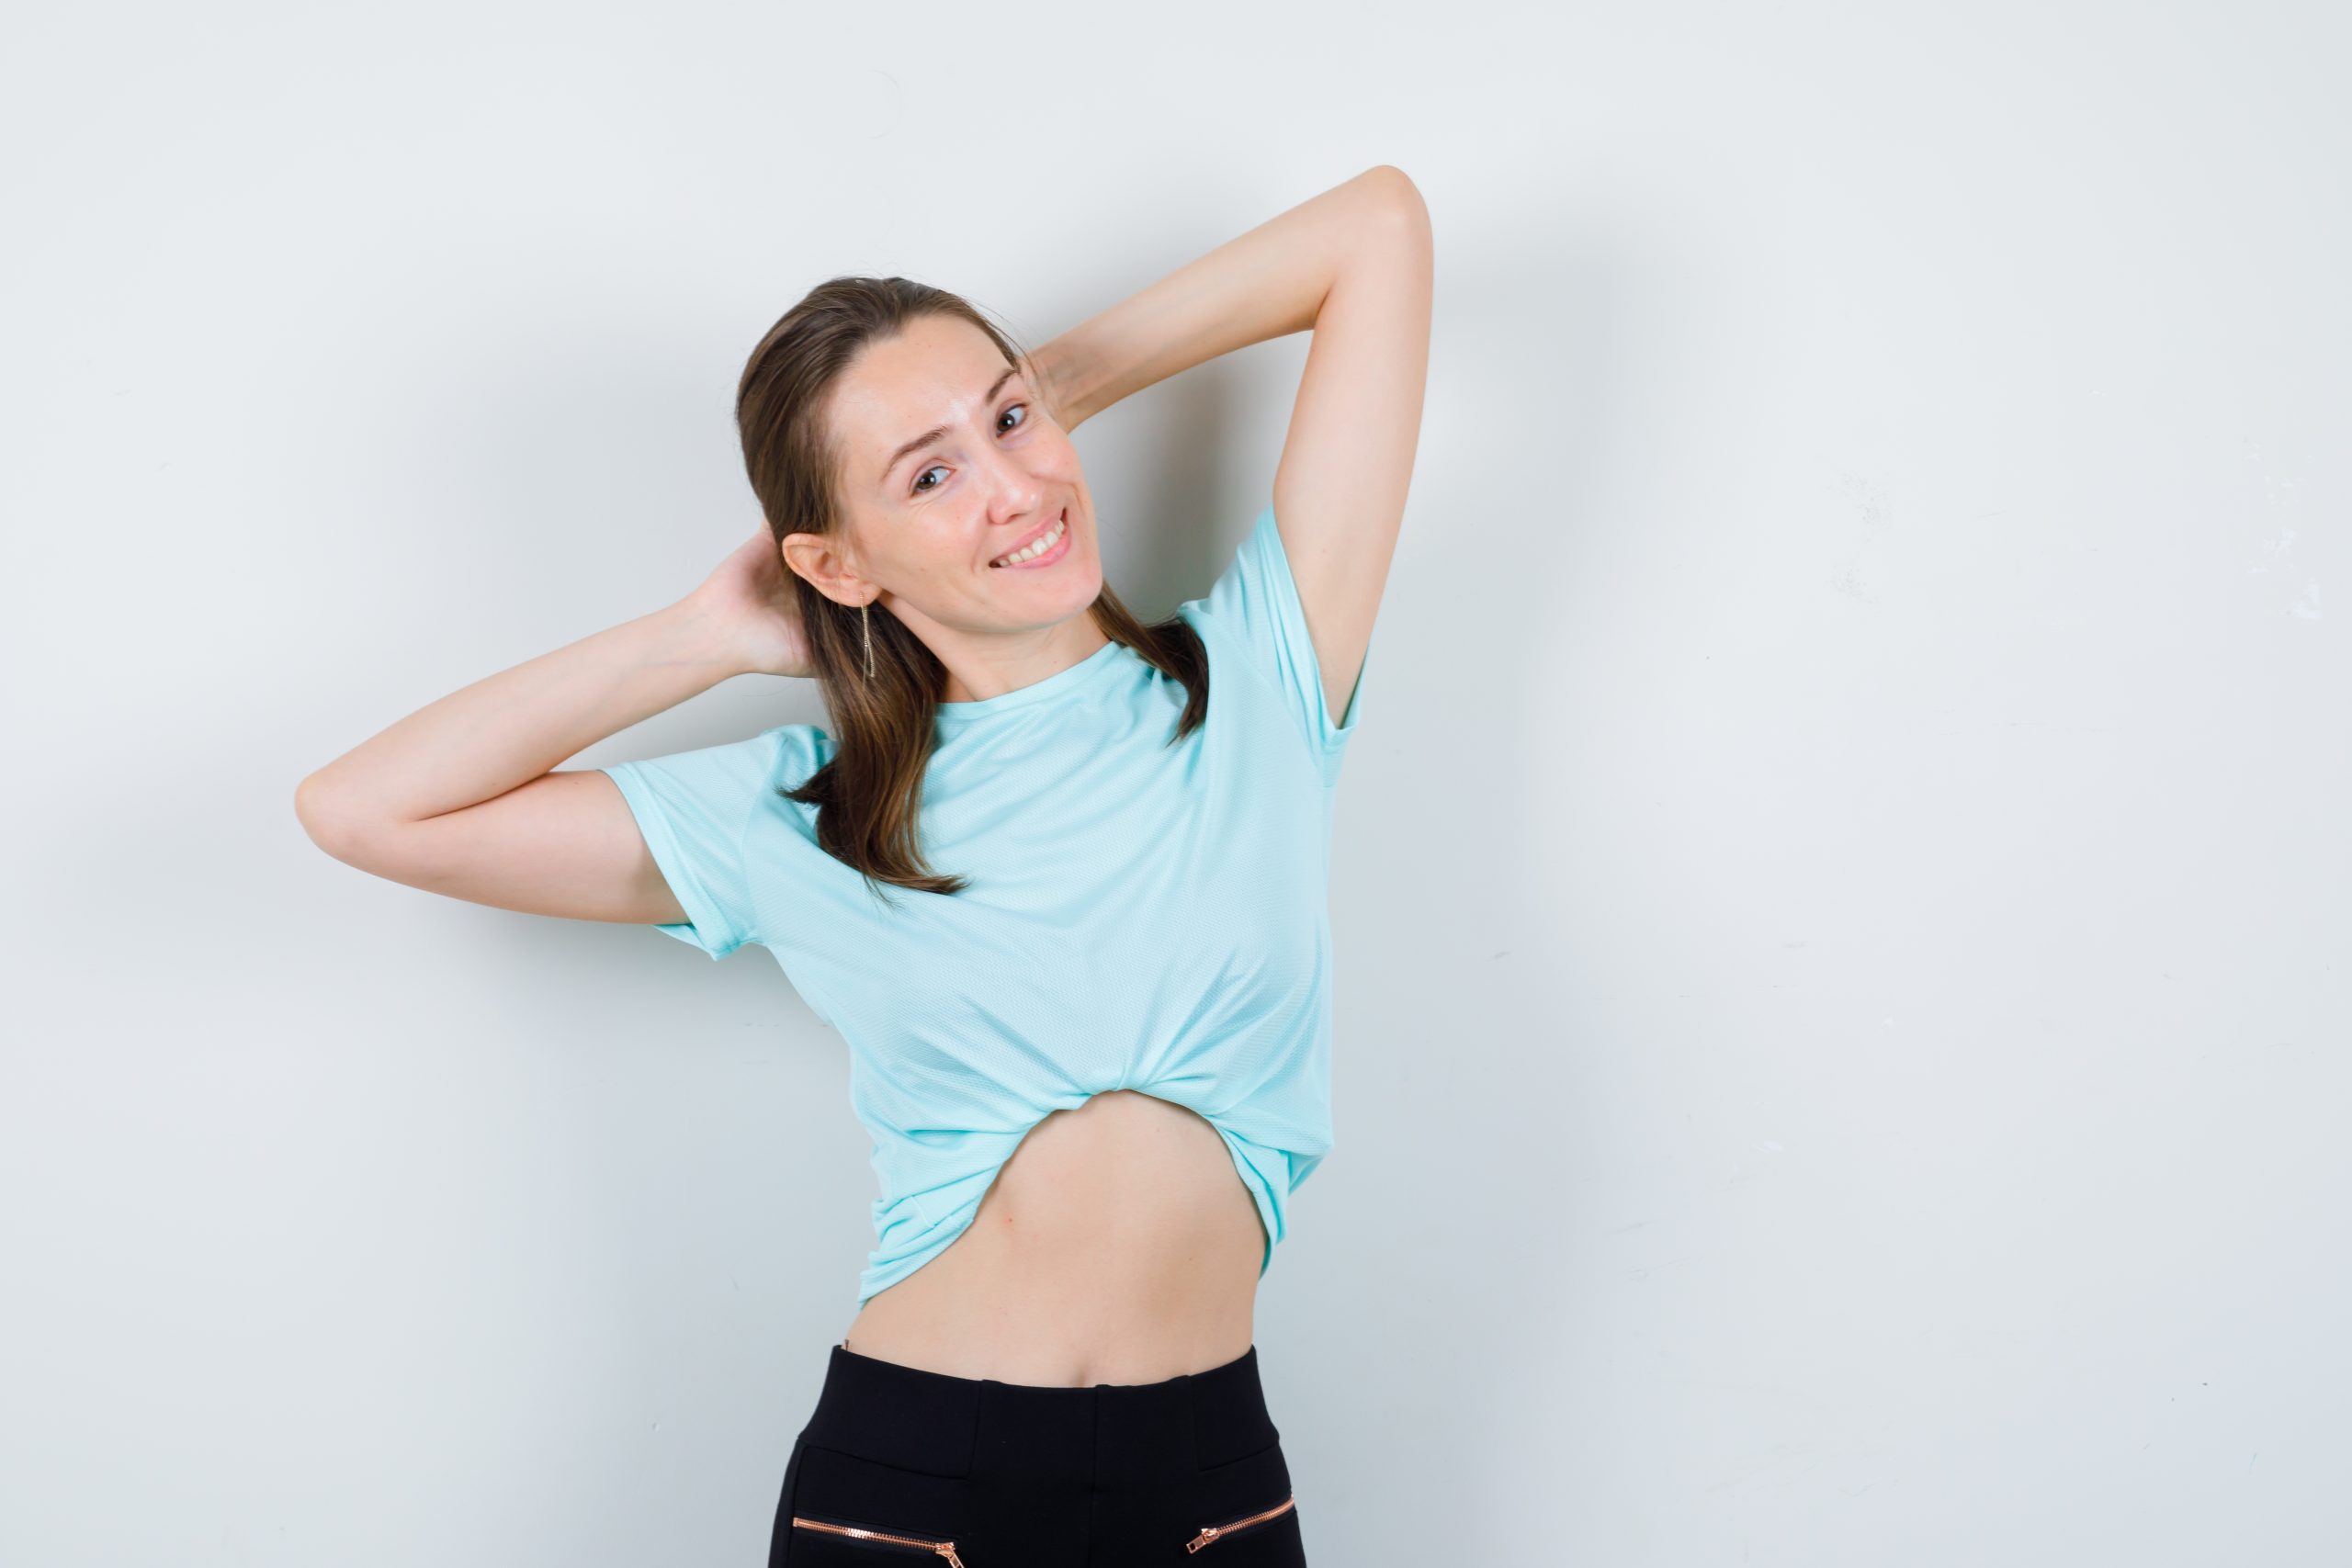 https://blog.tshirtplus.com.au/wp-content/uploads/2023/01/young-girl-with-hands-head-turquoise-t-shirt-pants-looking-cheerful-front-view-scaled.jpg